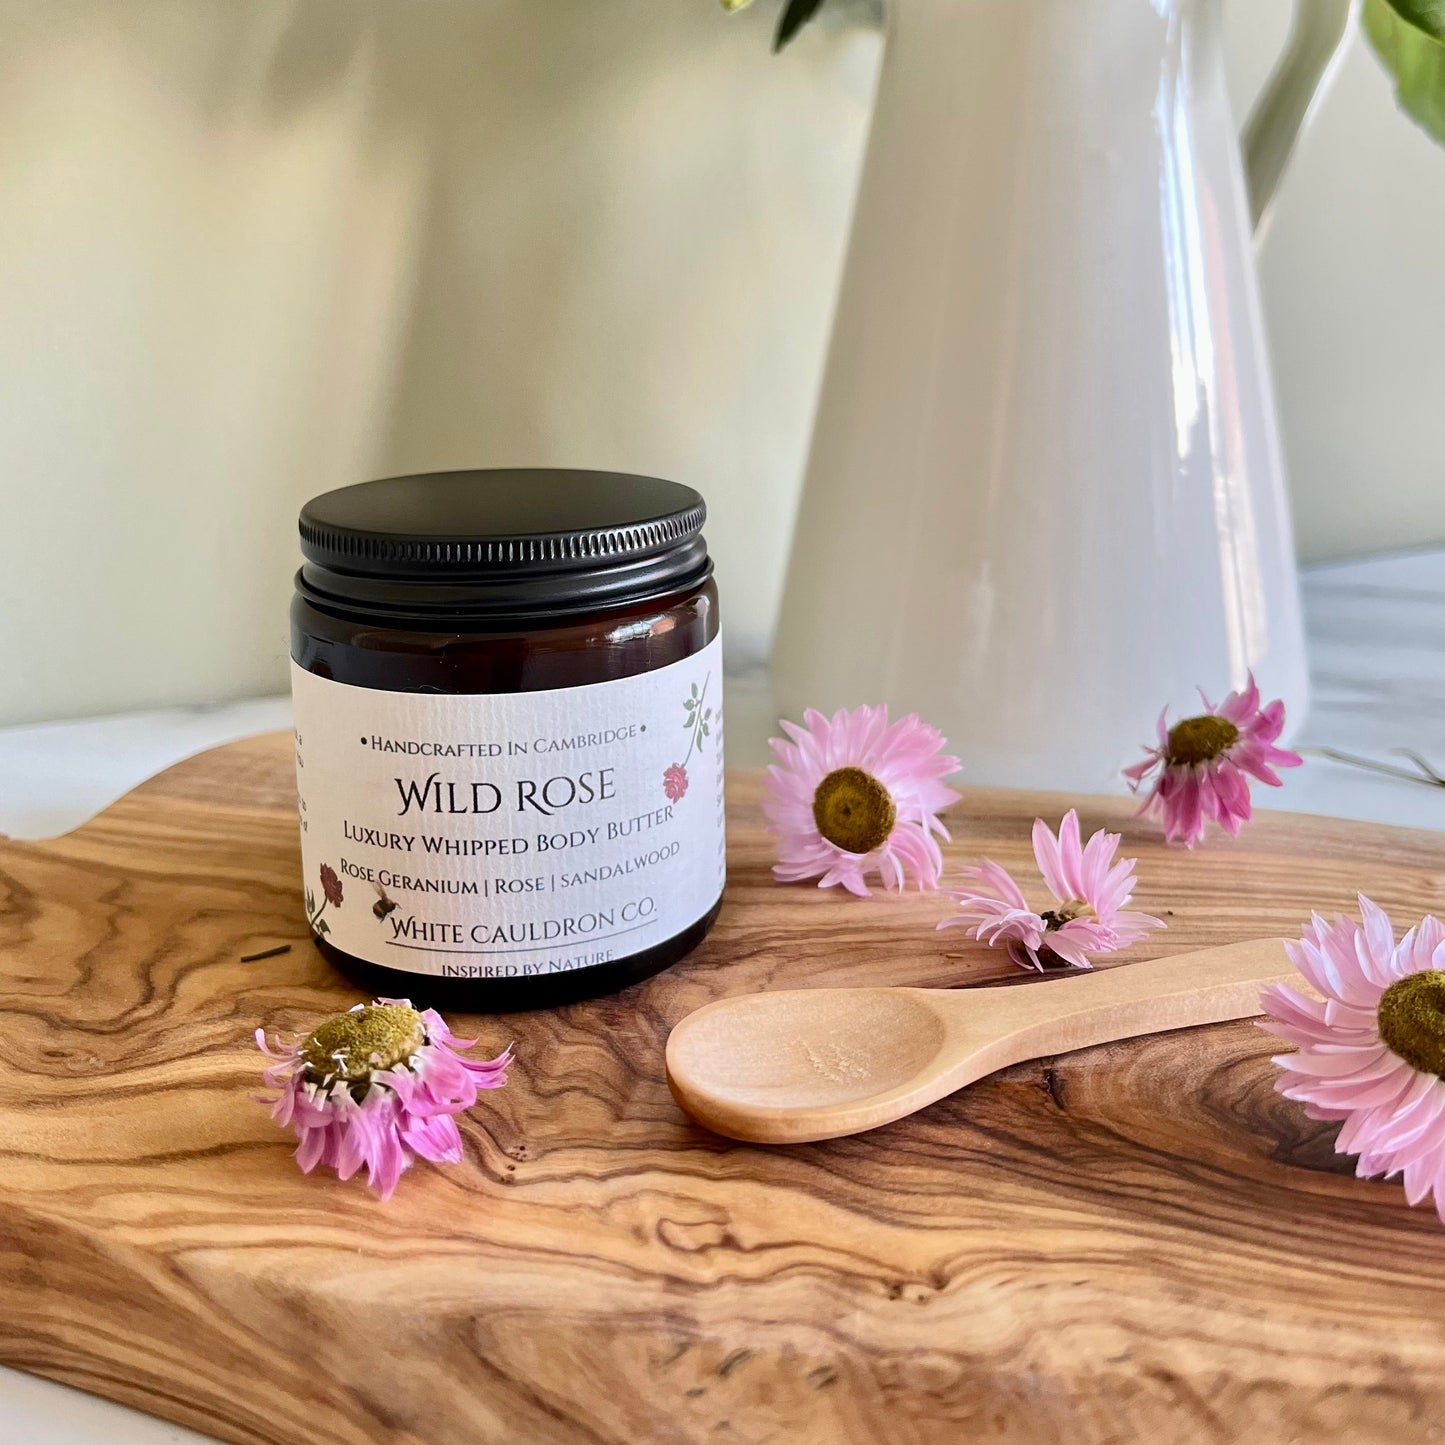 Wild Rose Luxury Whipped Body Butter